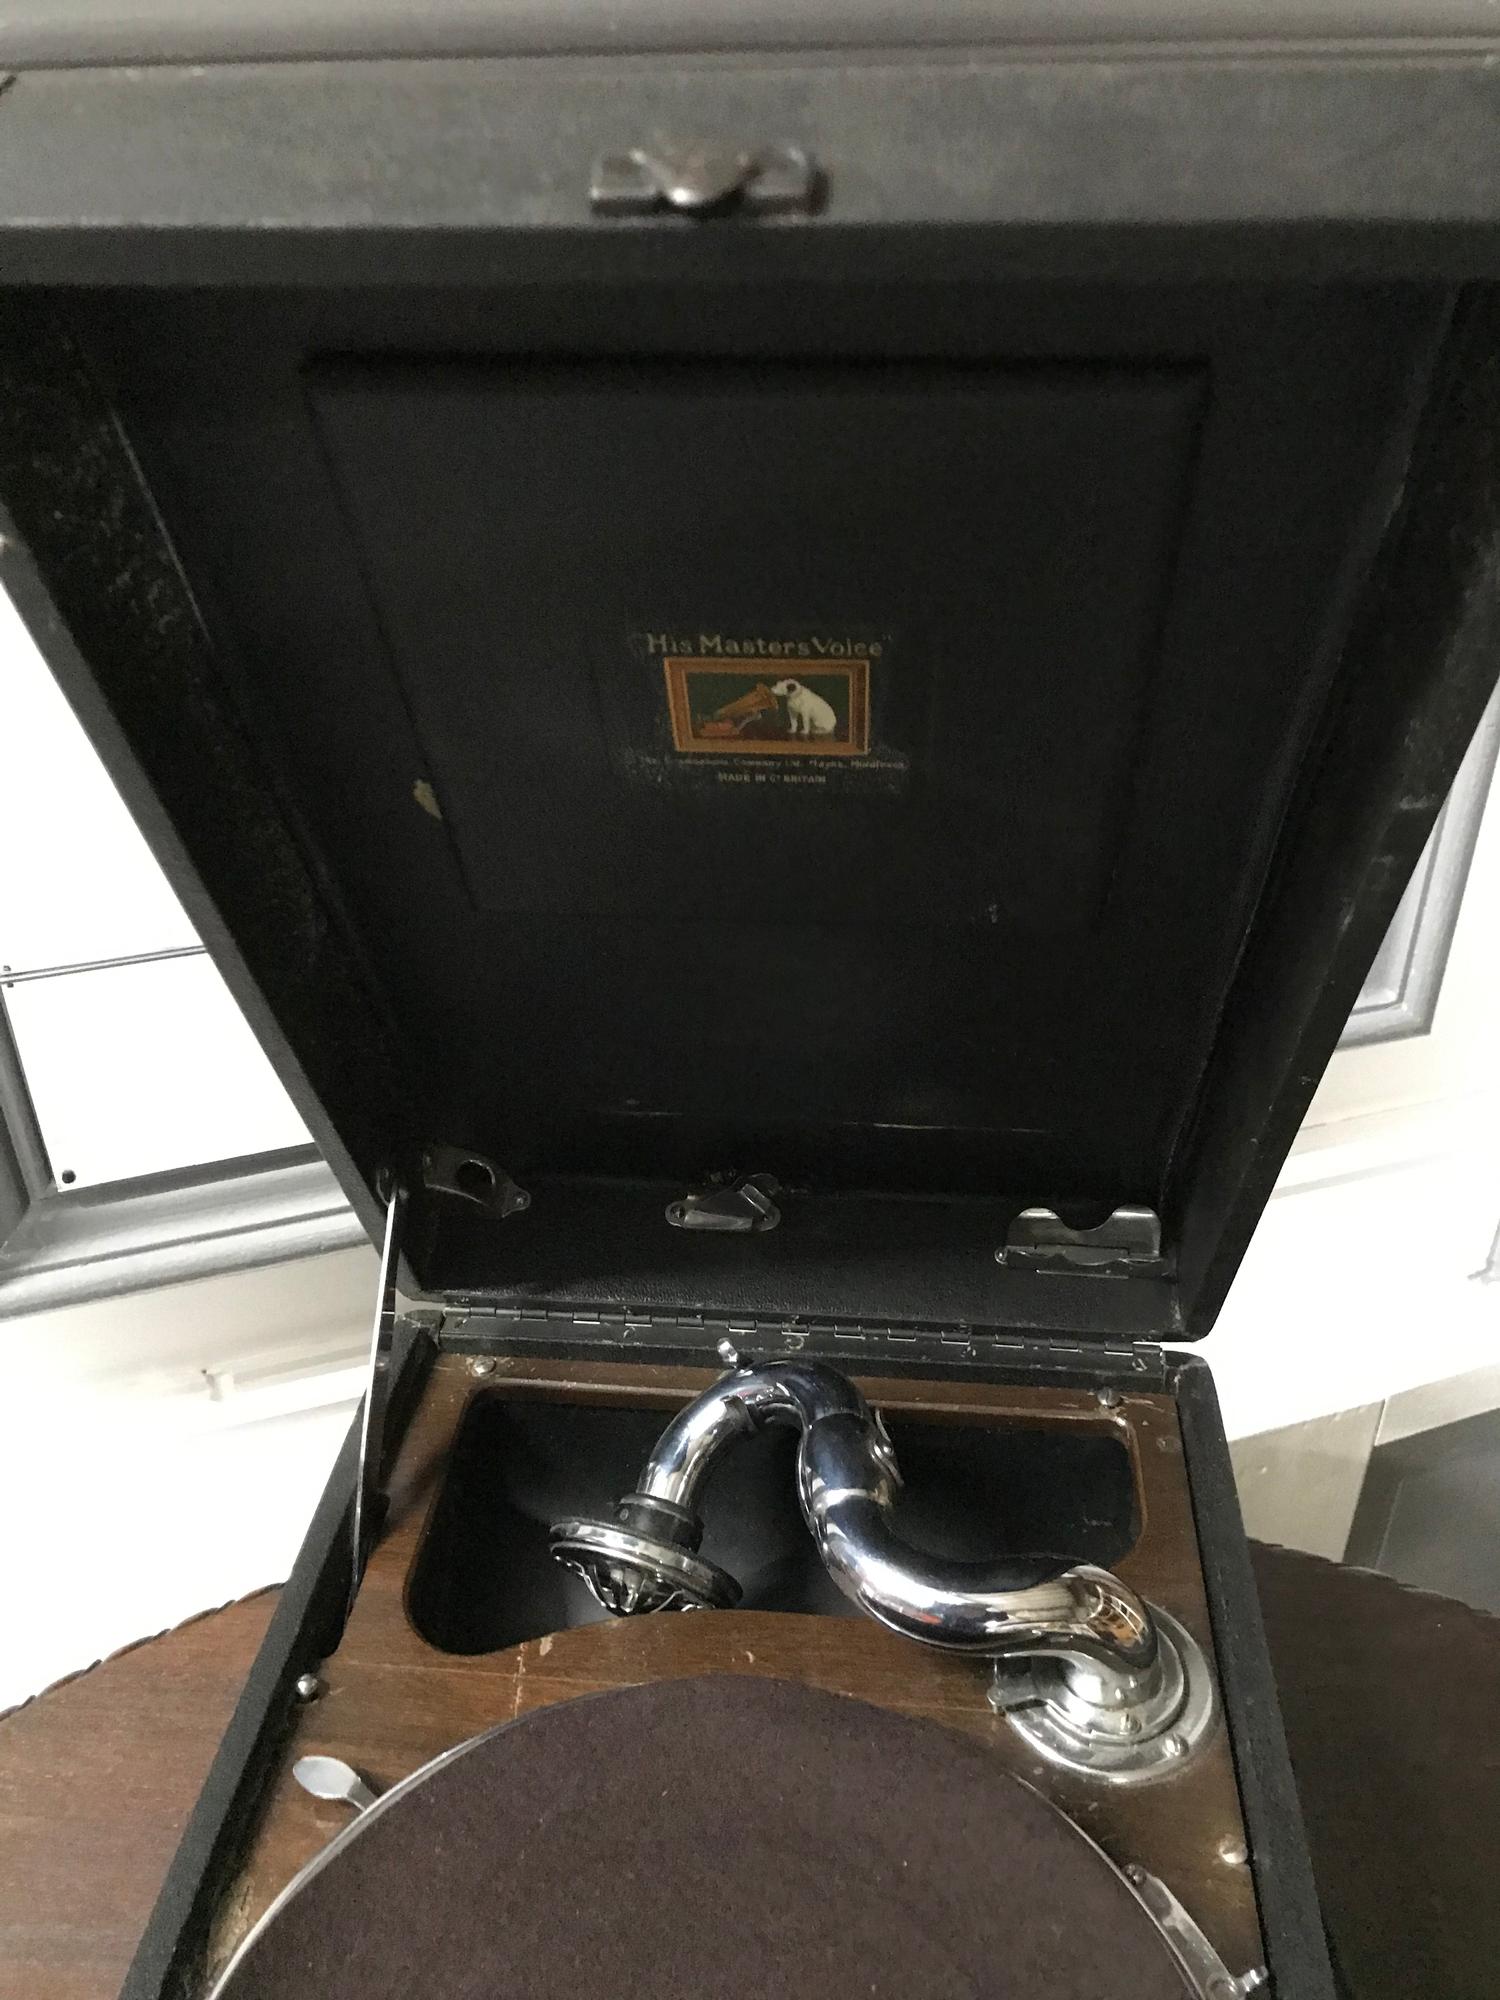 Vintage portable His Masters Voice Gramophone - Image 3 of 4